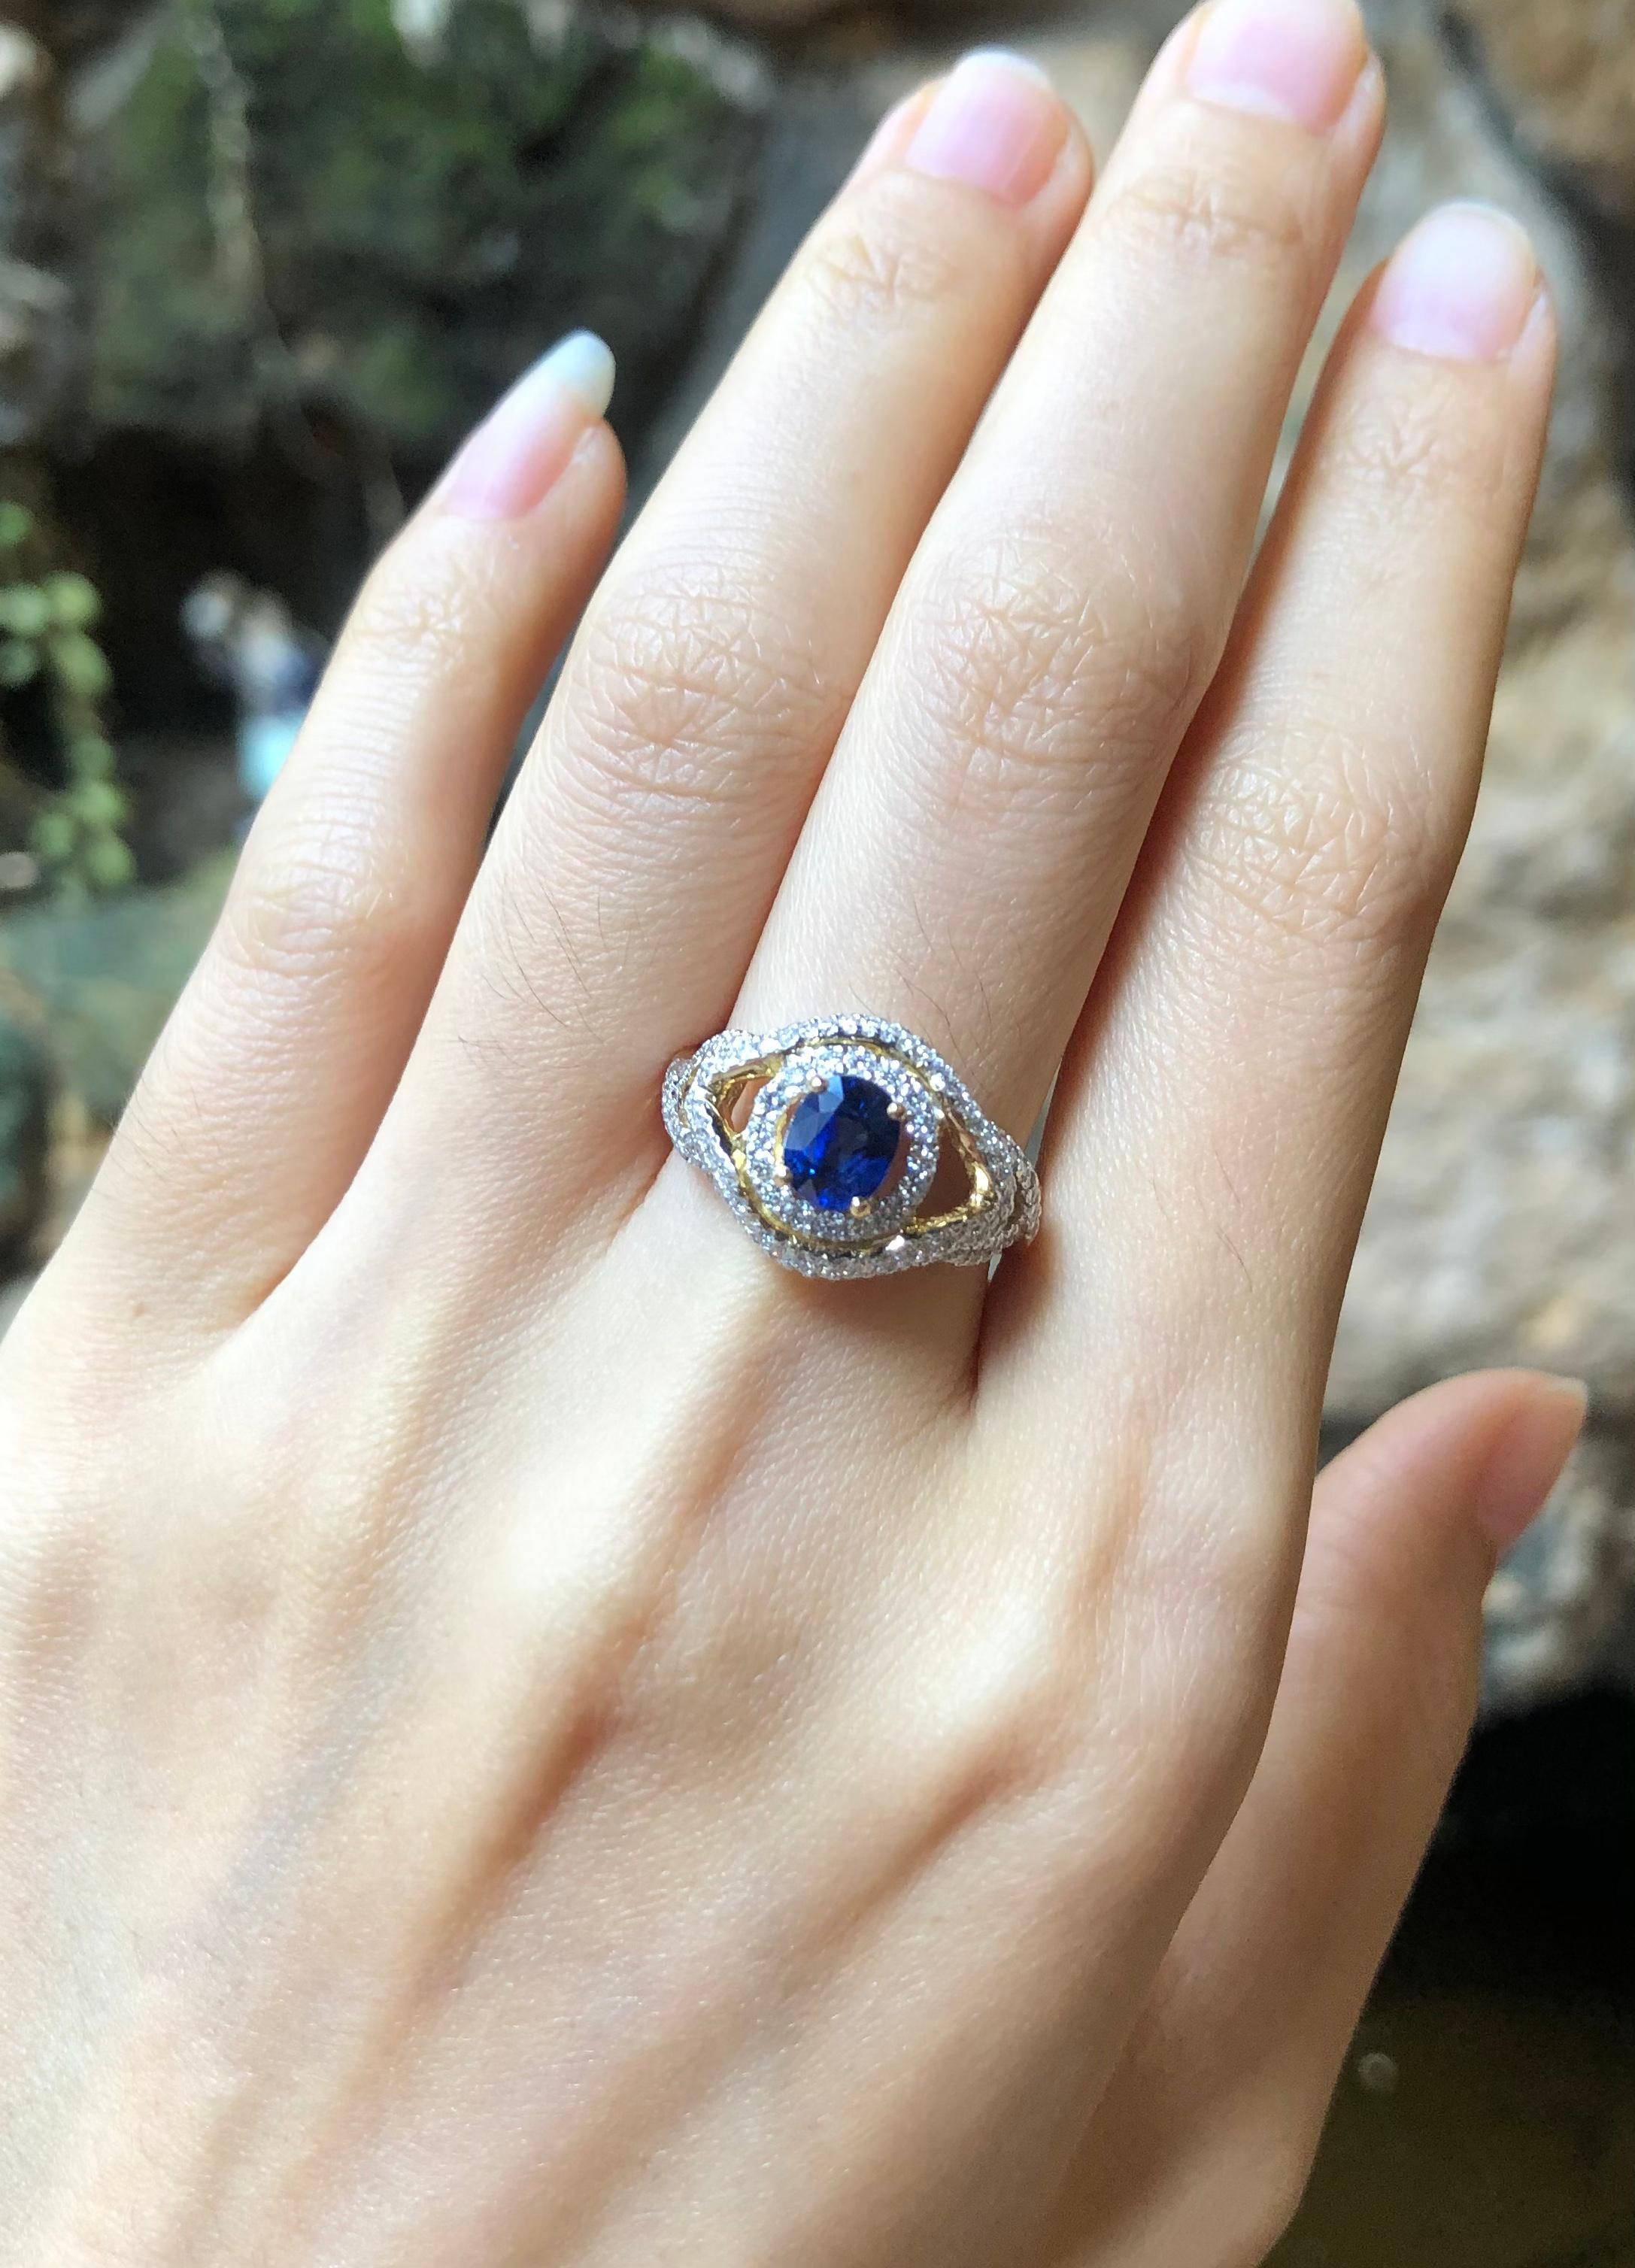 Blue sapphire 1.05 carats with Diamond 0.58 carat Ring set in 18 Karat Gold Settings

Width:  0.5 cm 
Length: 0.7 cm
Ring Size: 54
Total Weight: 4.88 grams

